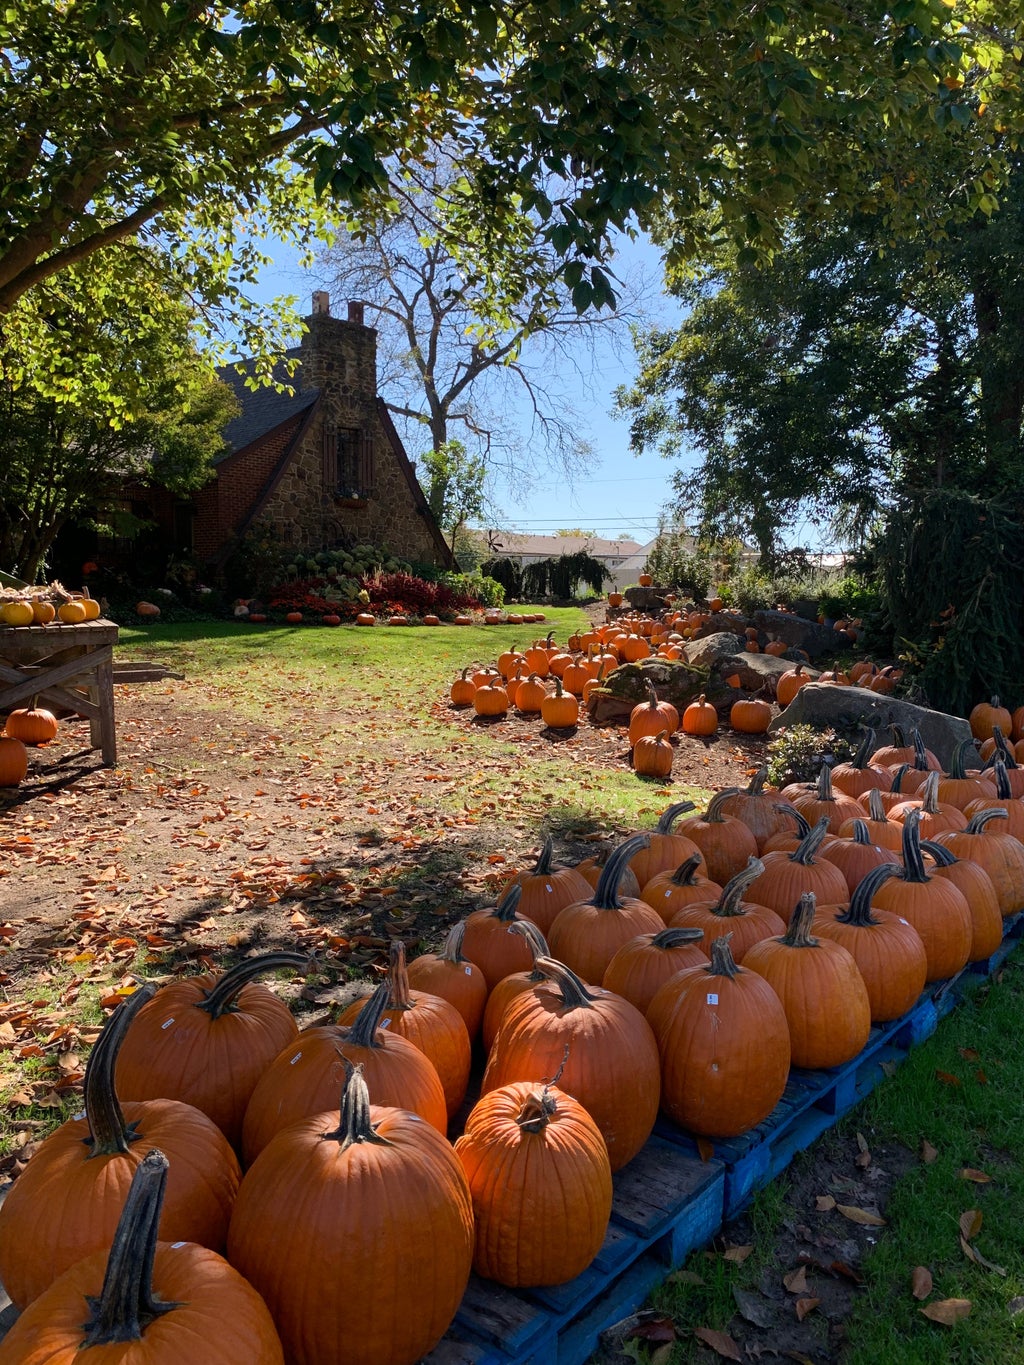 Row of pumpkins with a house in the background